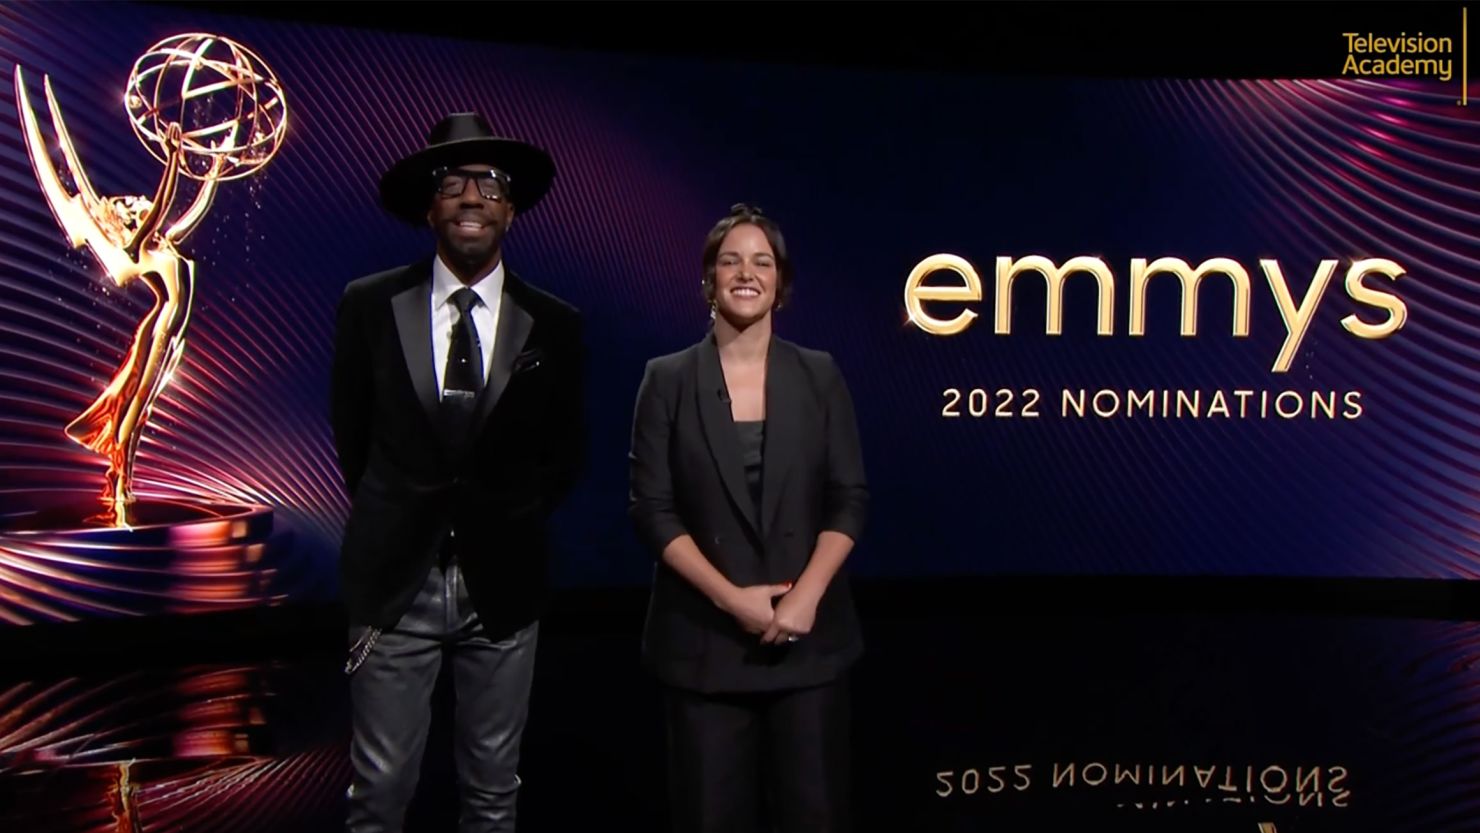 JB Smoove and Melissa Fumero present the nominees for the 74th Emmy Awards on July 12, 2022.